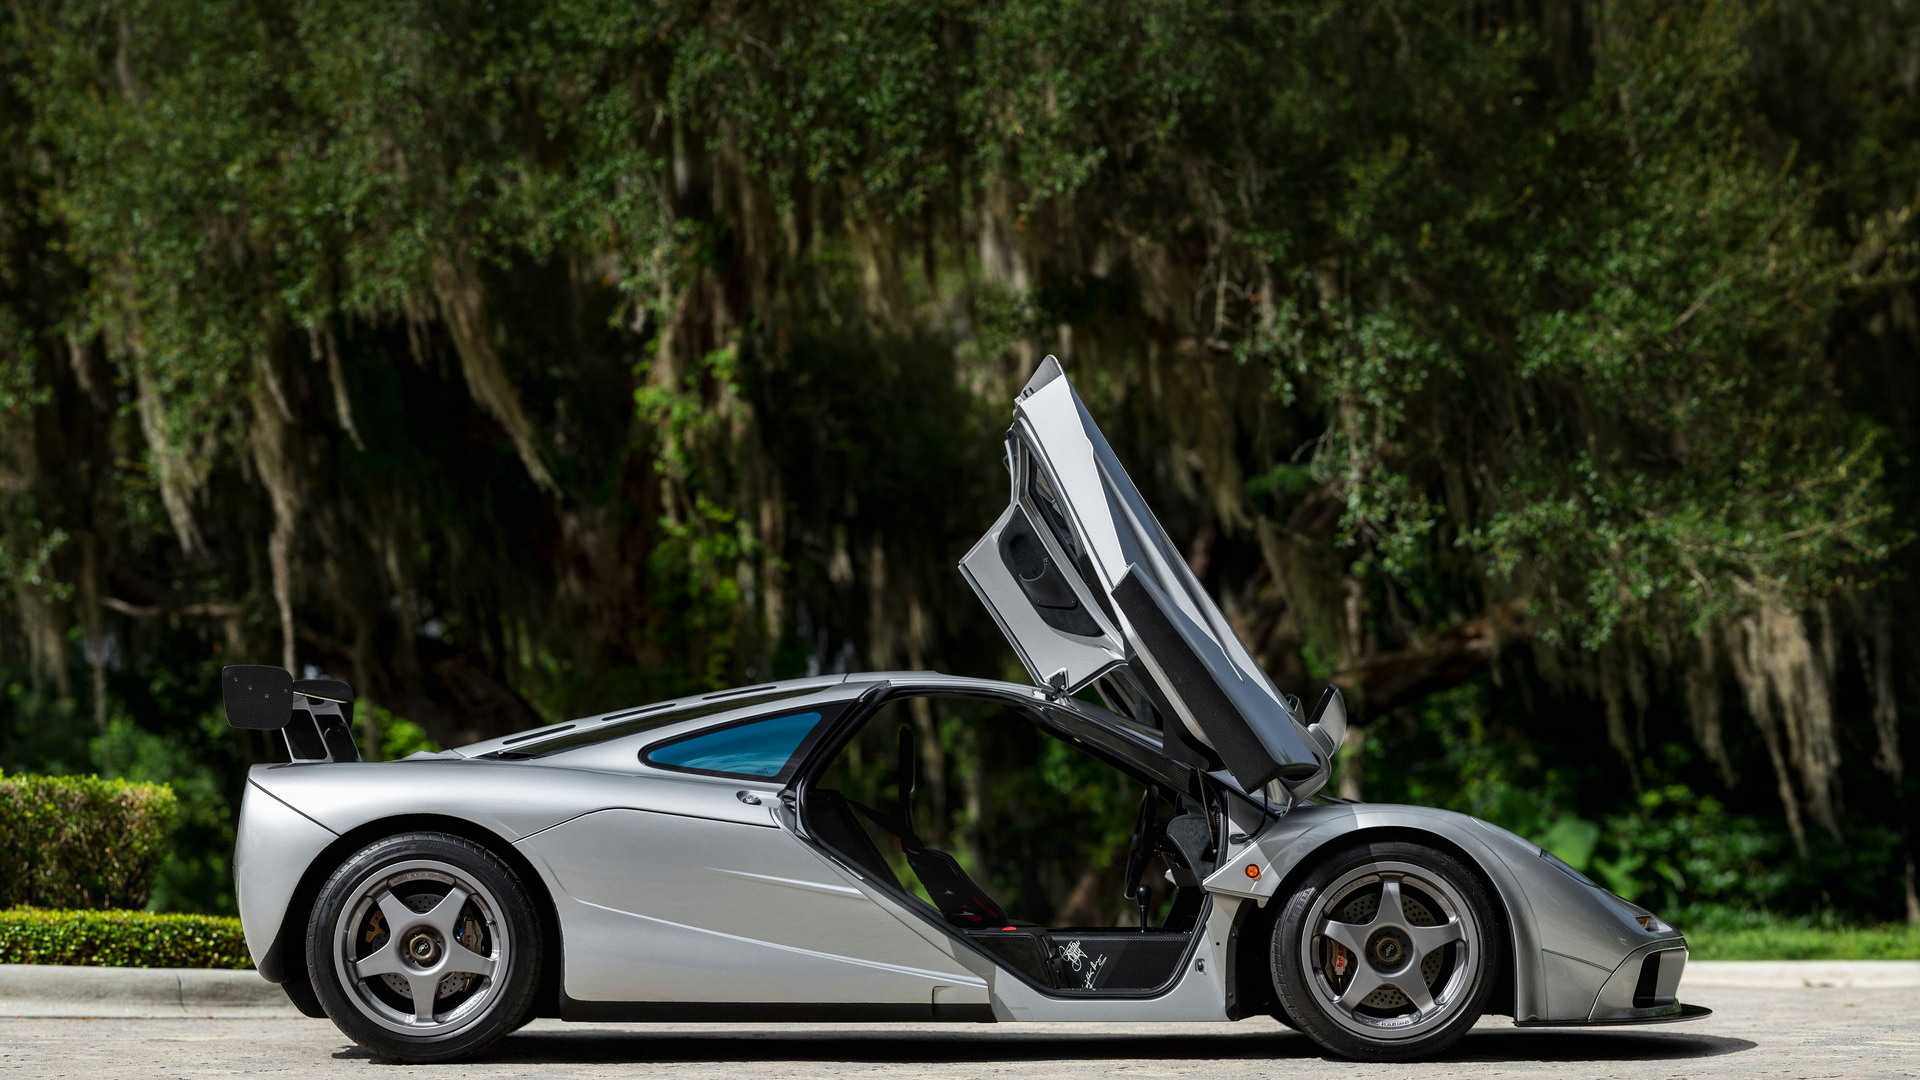 McLaren F1 bearing chassis no. ending in 059 - Photo credit: RM Sotheby's